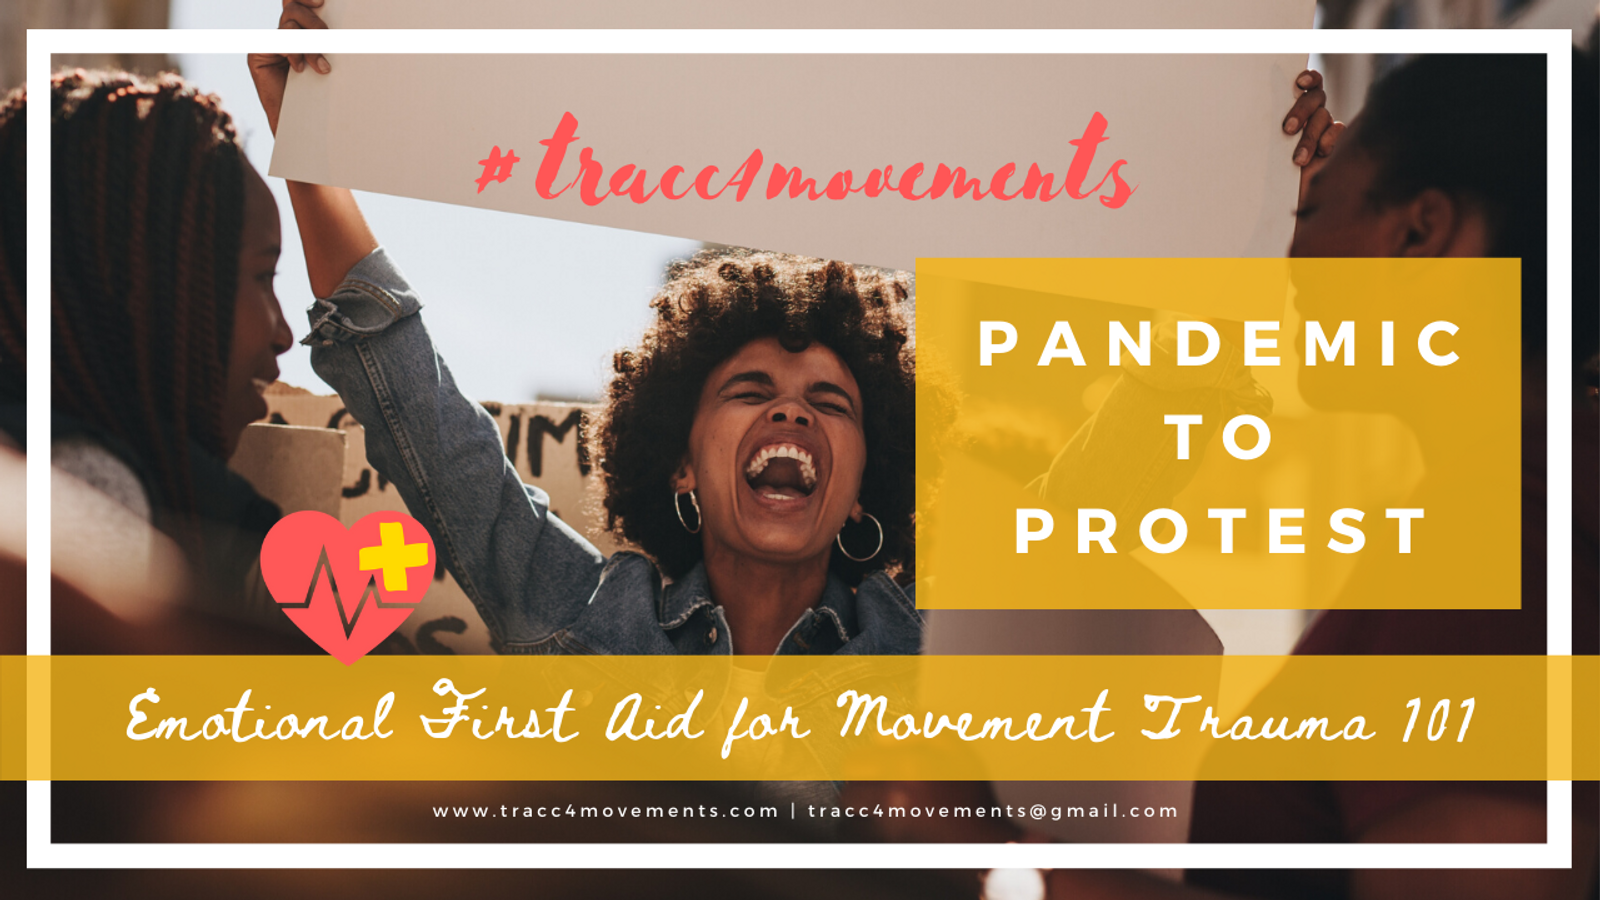 Pandemic to Protest: Emotional First Aid to Movement Trauma 101